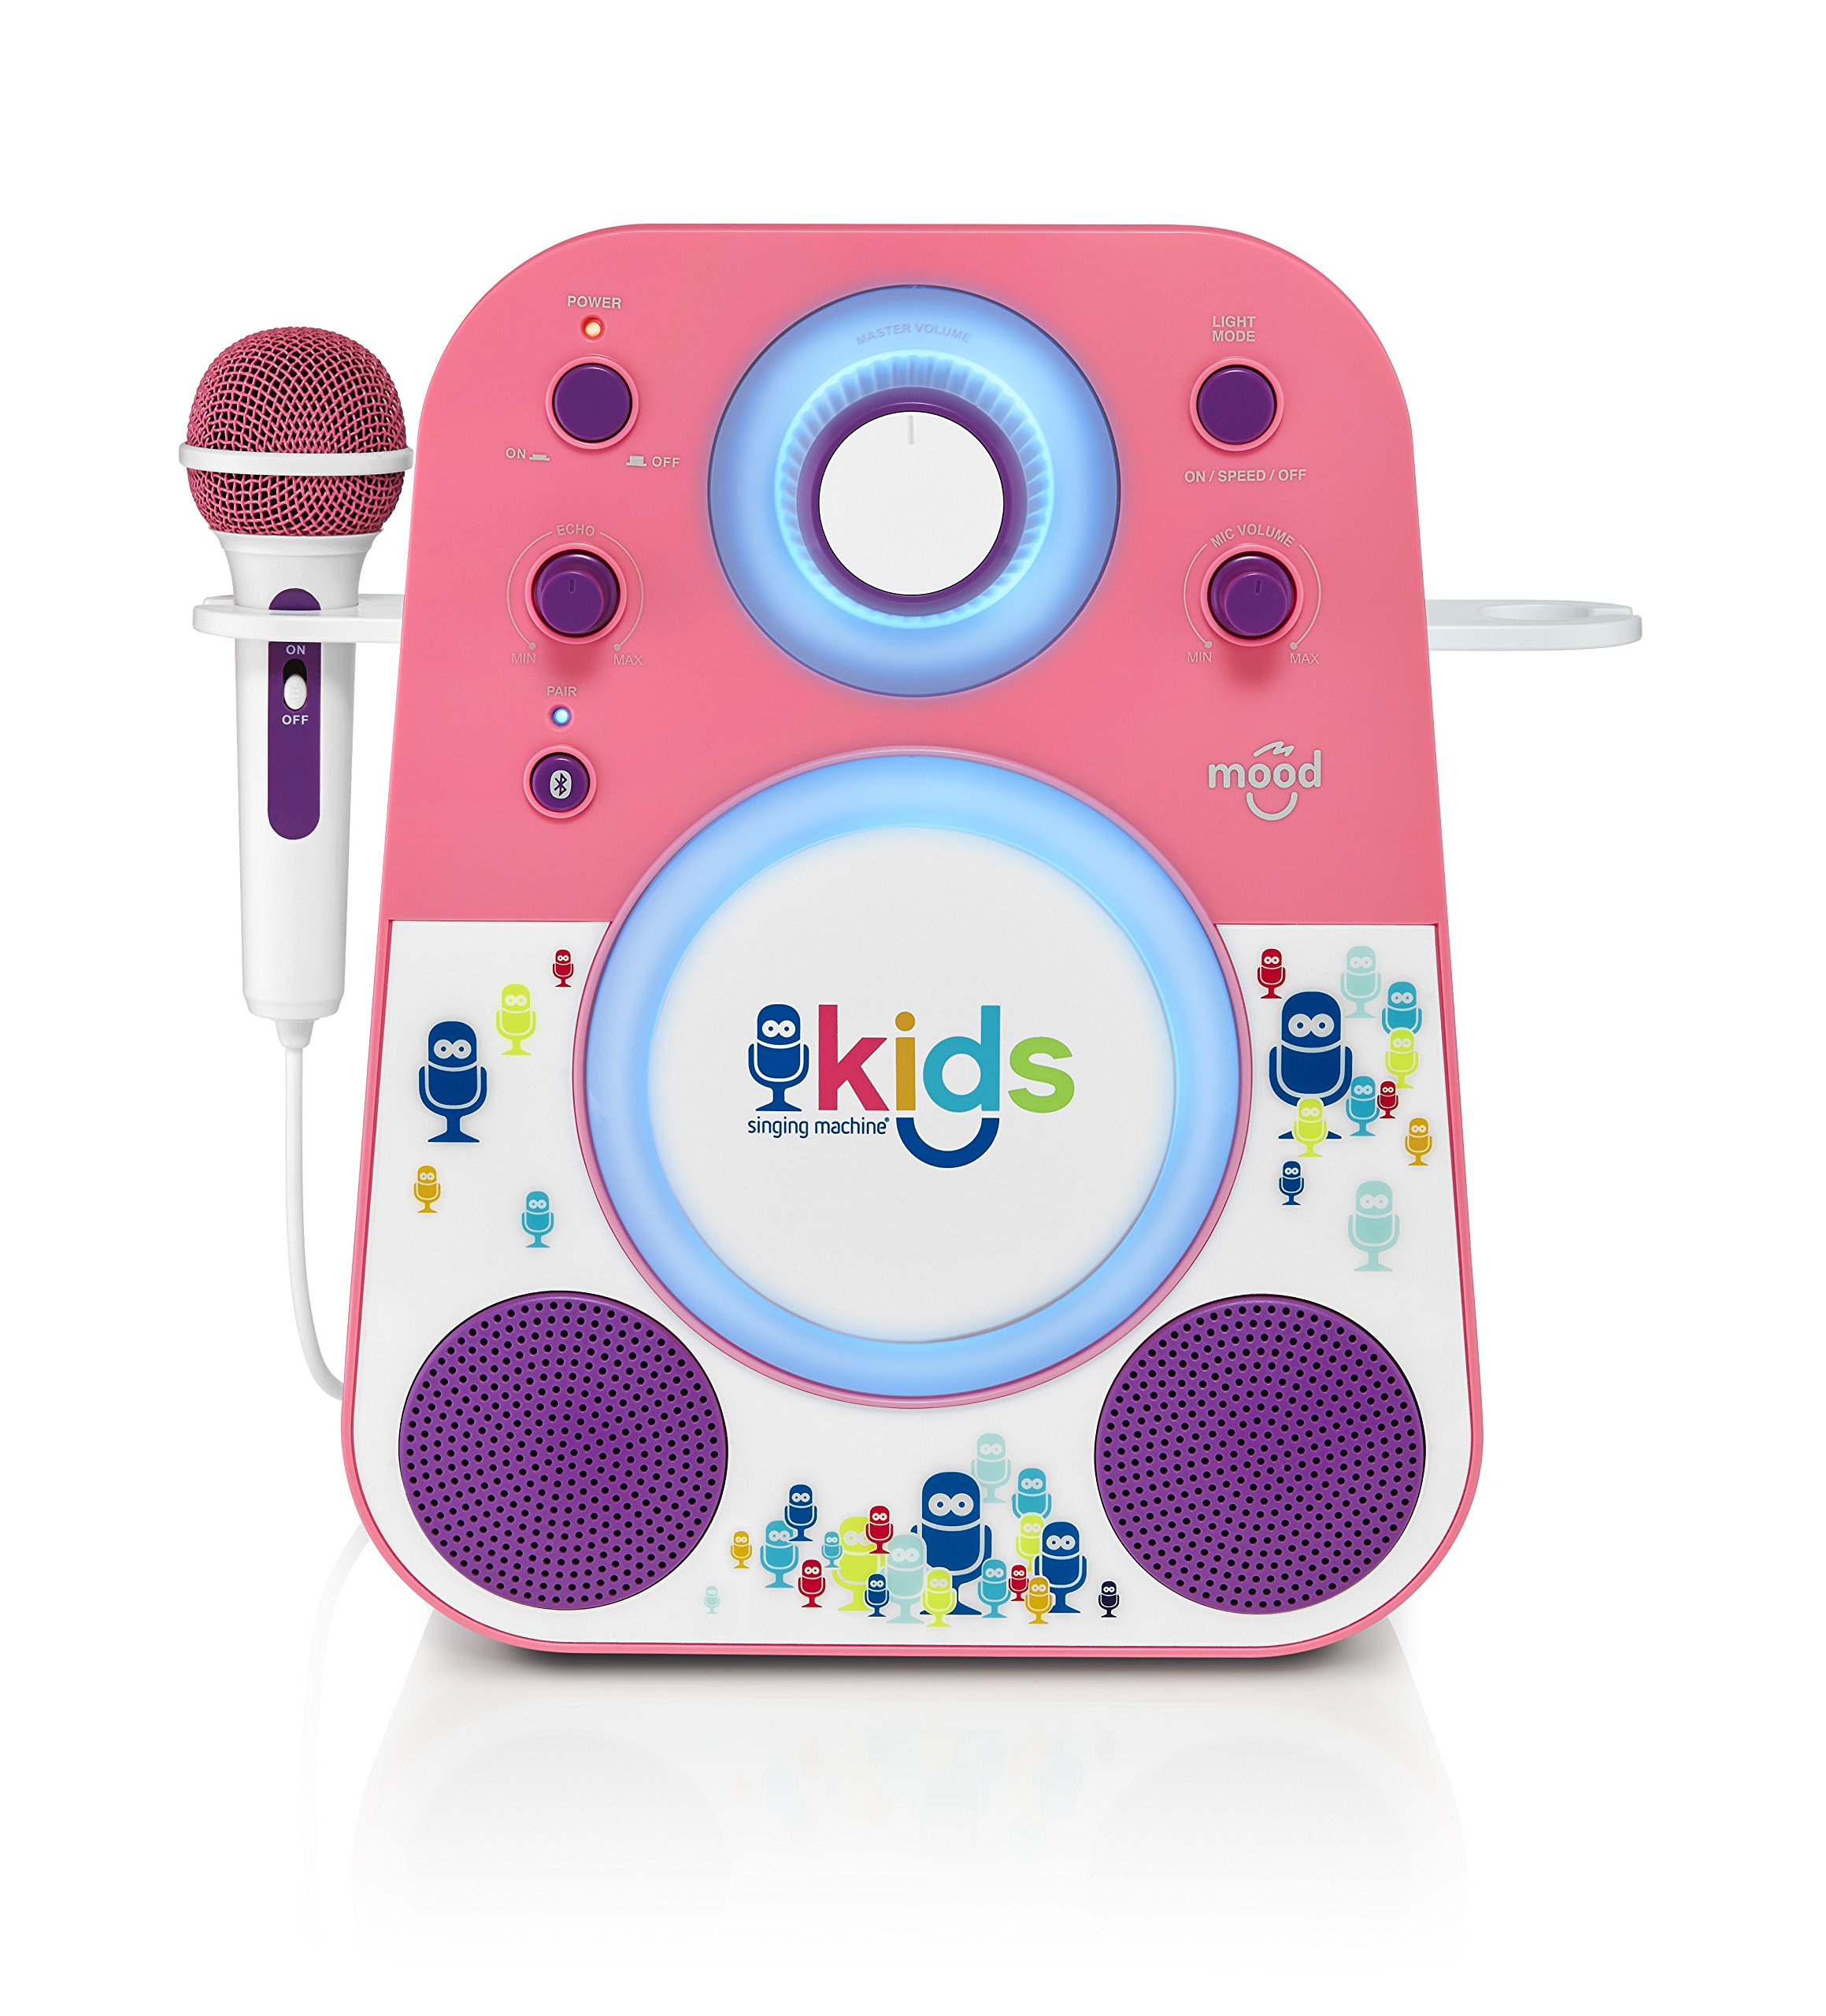 Singing Machine Kid's SMK250PP Mood LED Glowing Bluetooth Sing-Along Speaker with Wired Youth Microphone Doubles as a Night Light, Pink/Purple